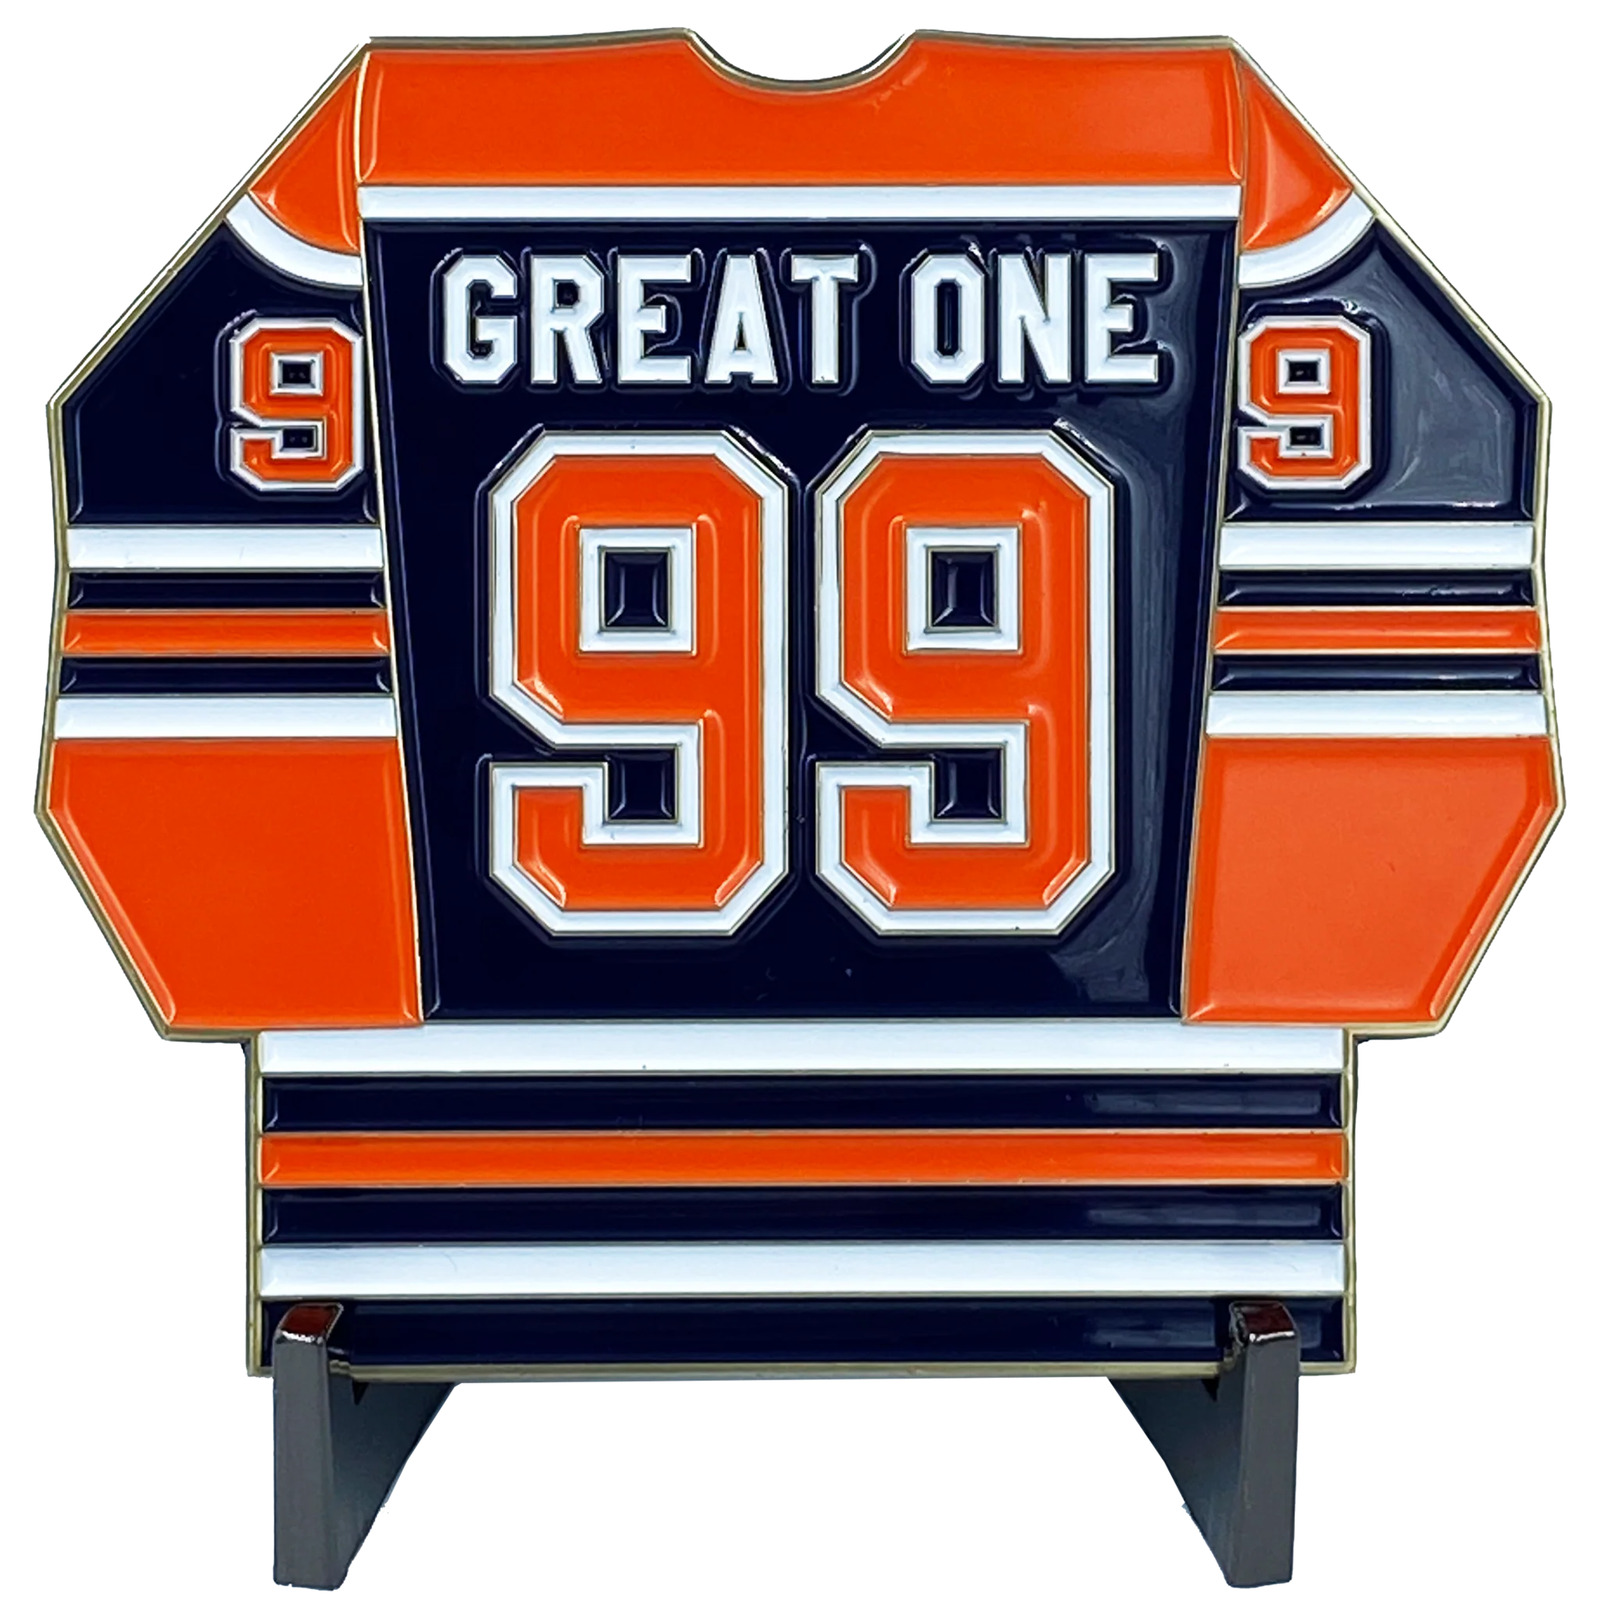 The Great One Challenge Coin Inspired by Wayne Gretzky 99 Edmonton Jersey USA Ca